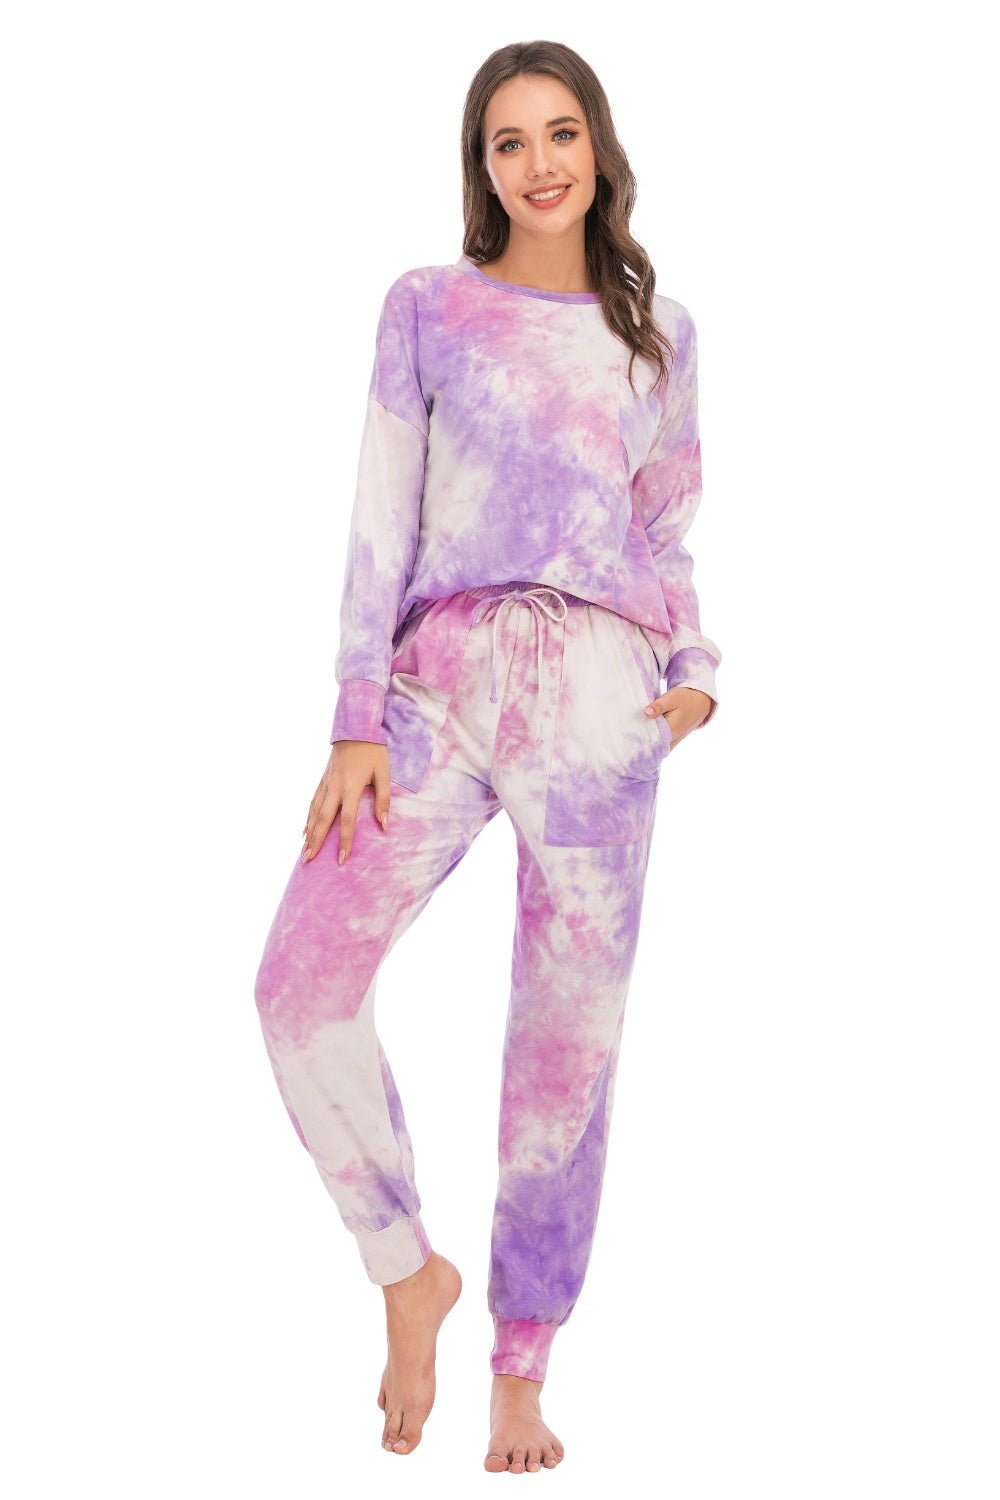 Tie-Dye Top and Pants Lounge Set - GemThreads Boutique